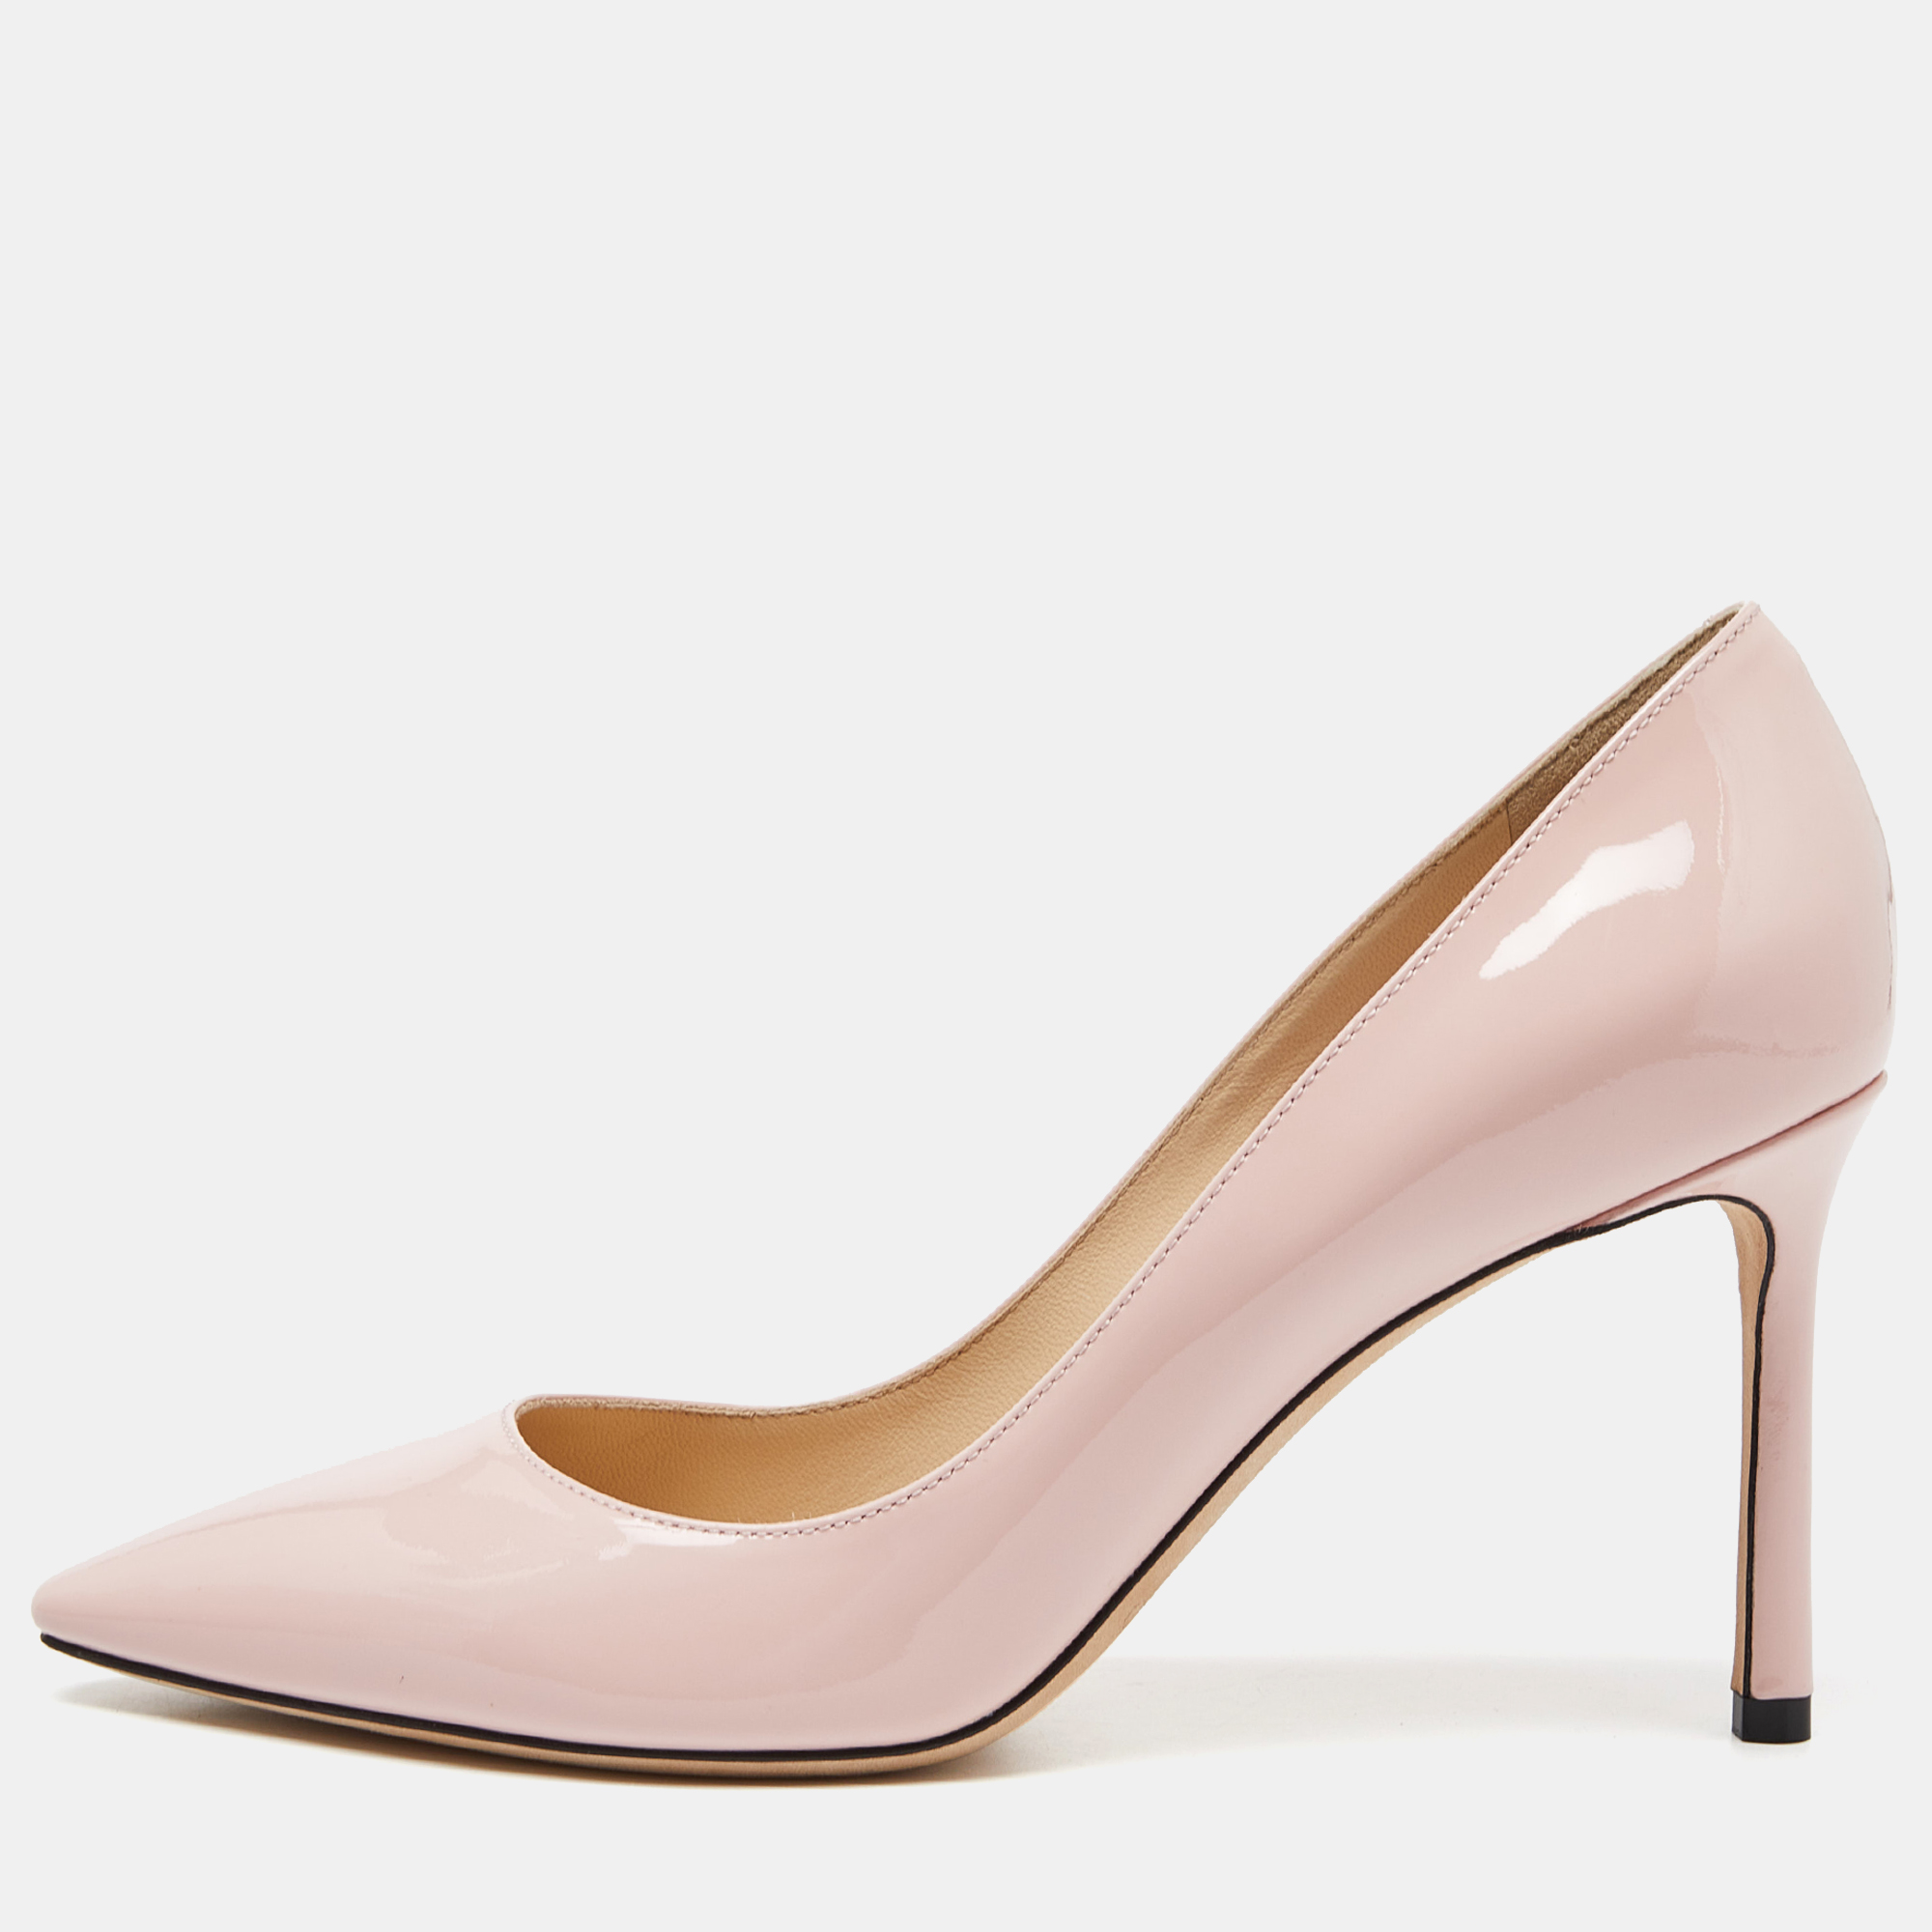 

Jimmy Choo Pink Patent Leather Romy Pumps Size